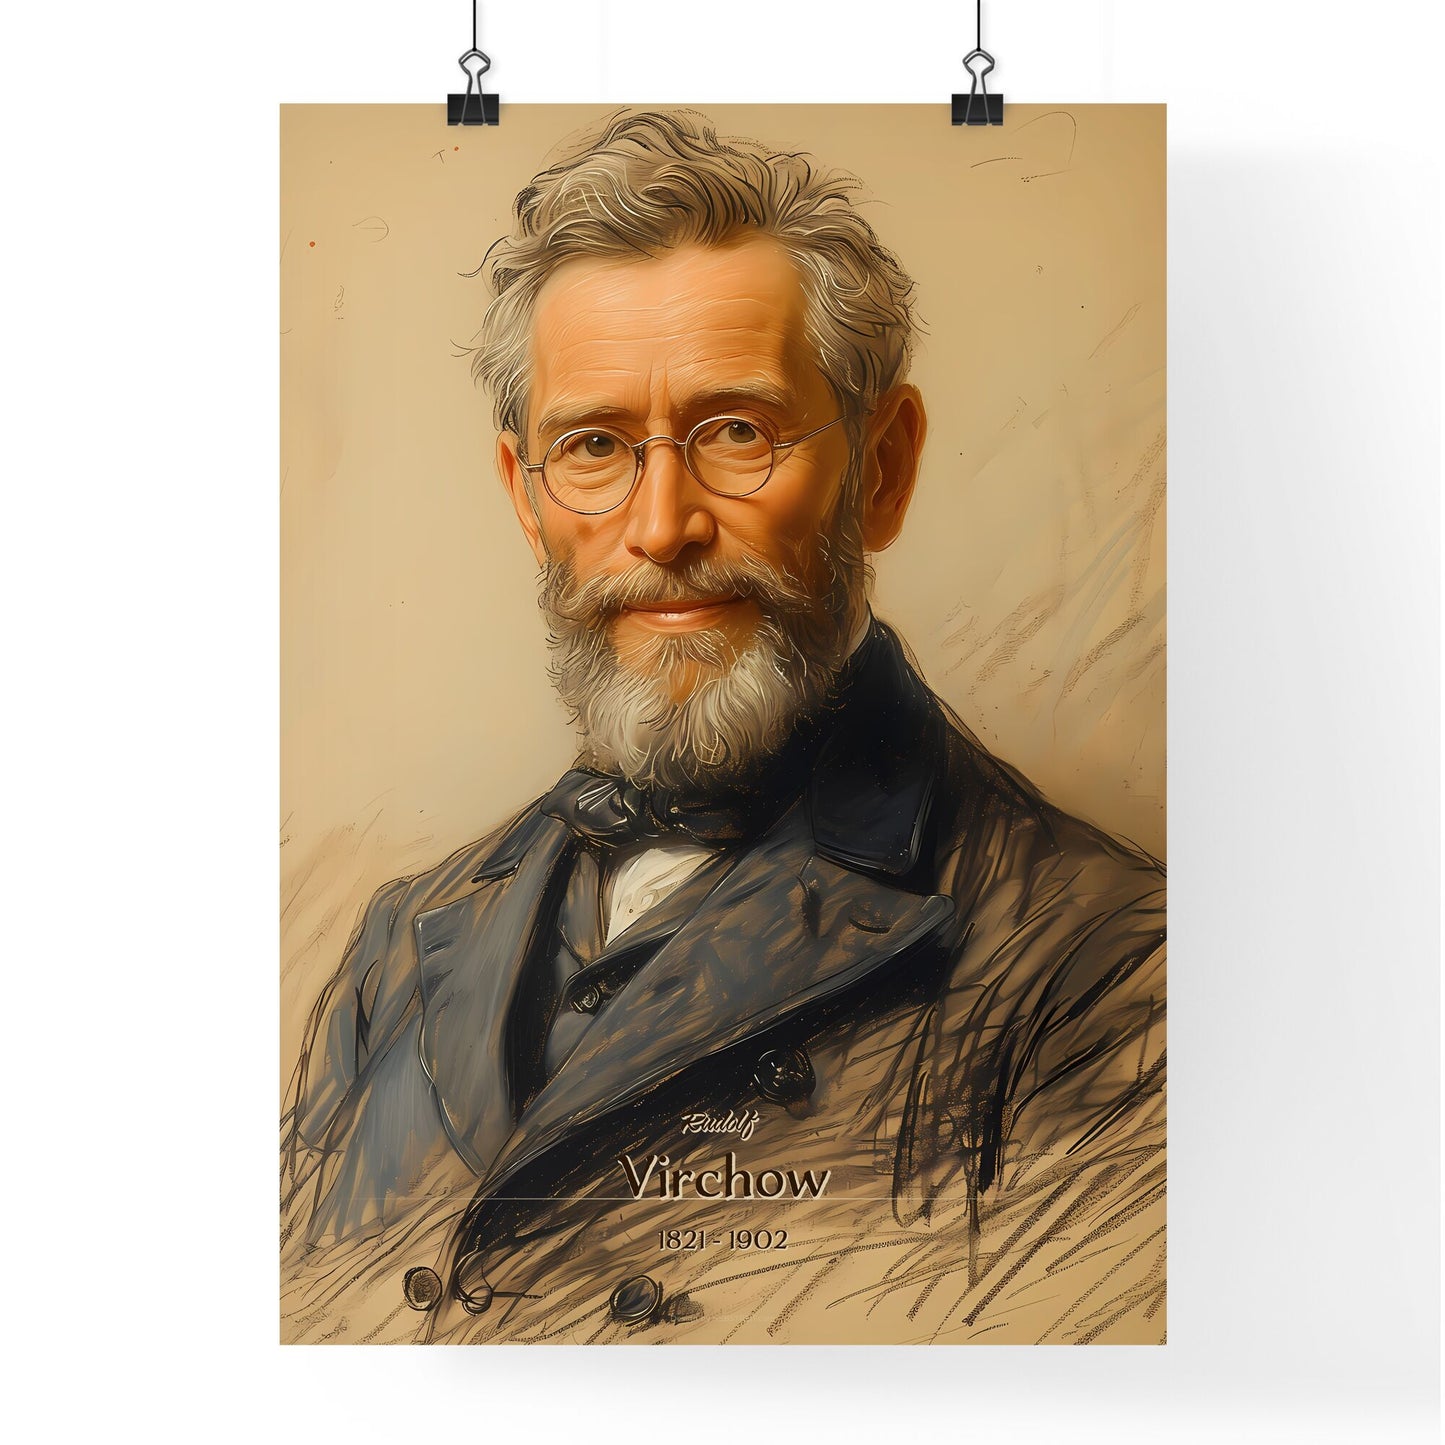 Rudolf, Virchow, 1821 - 1902, A Poster of a man with a beard and glasses Default Title